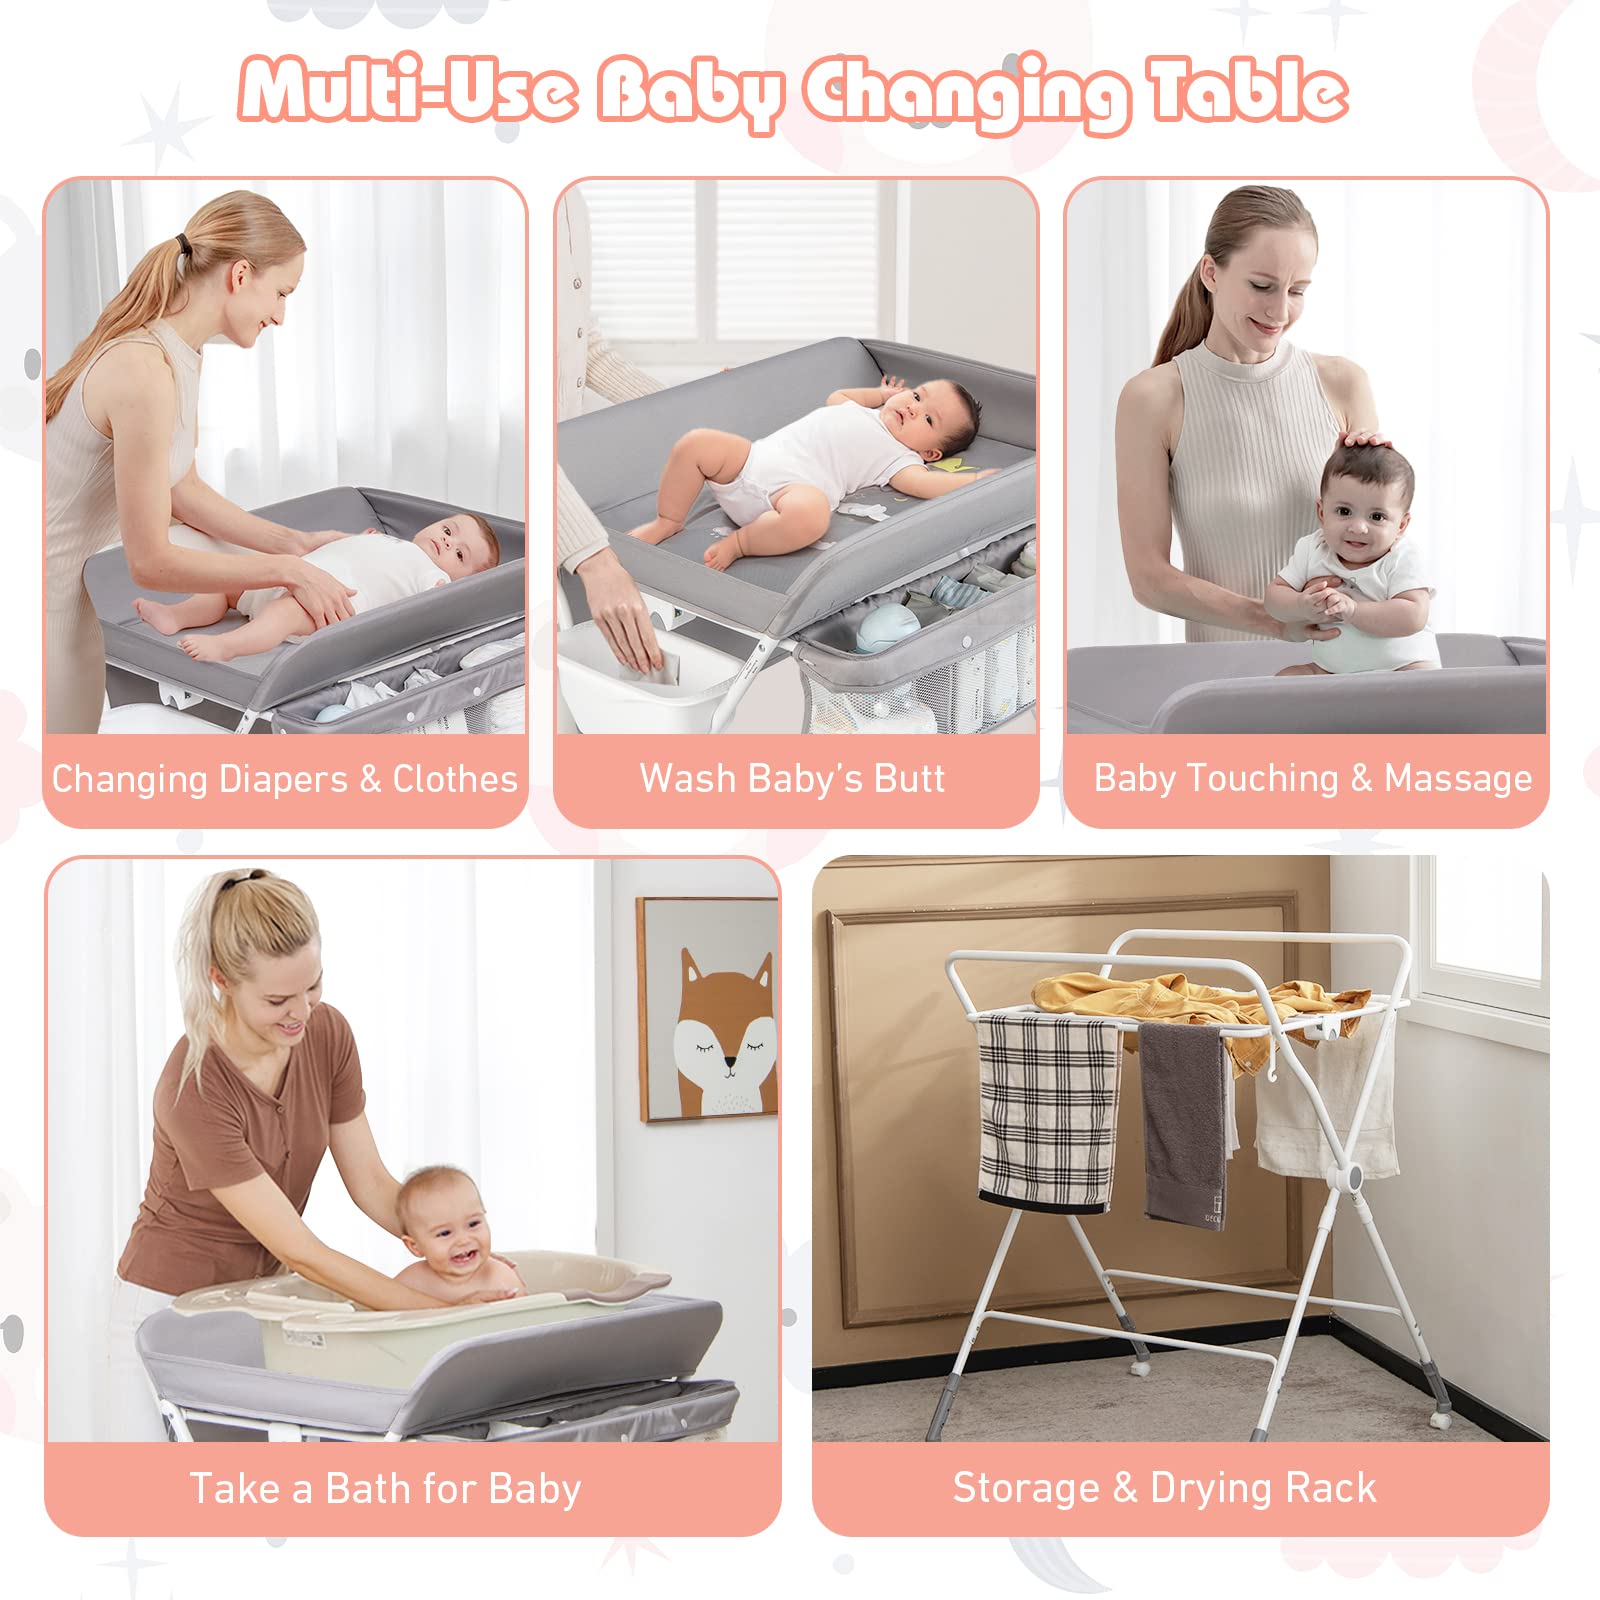 BABY JOY Portable Baby Changing Table, Foldable Diaper Changing Station w/Wheels, Adjustable Height, Large Storage Rack, Water Basin, Safety Belt, Mobile Nursery Organizer for Newborn Infant (Gray)